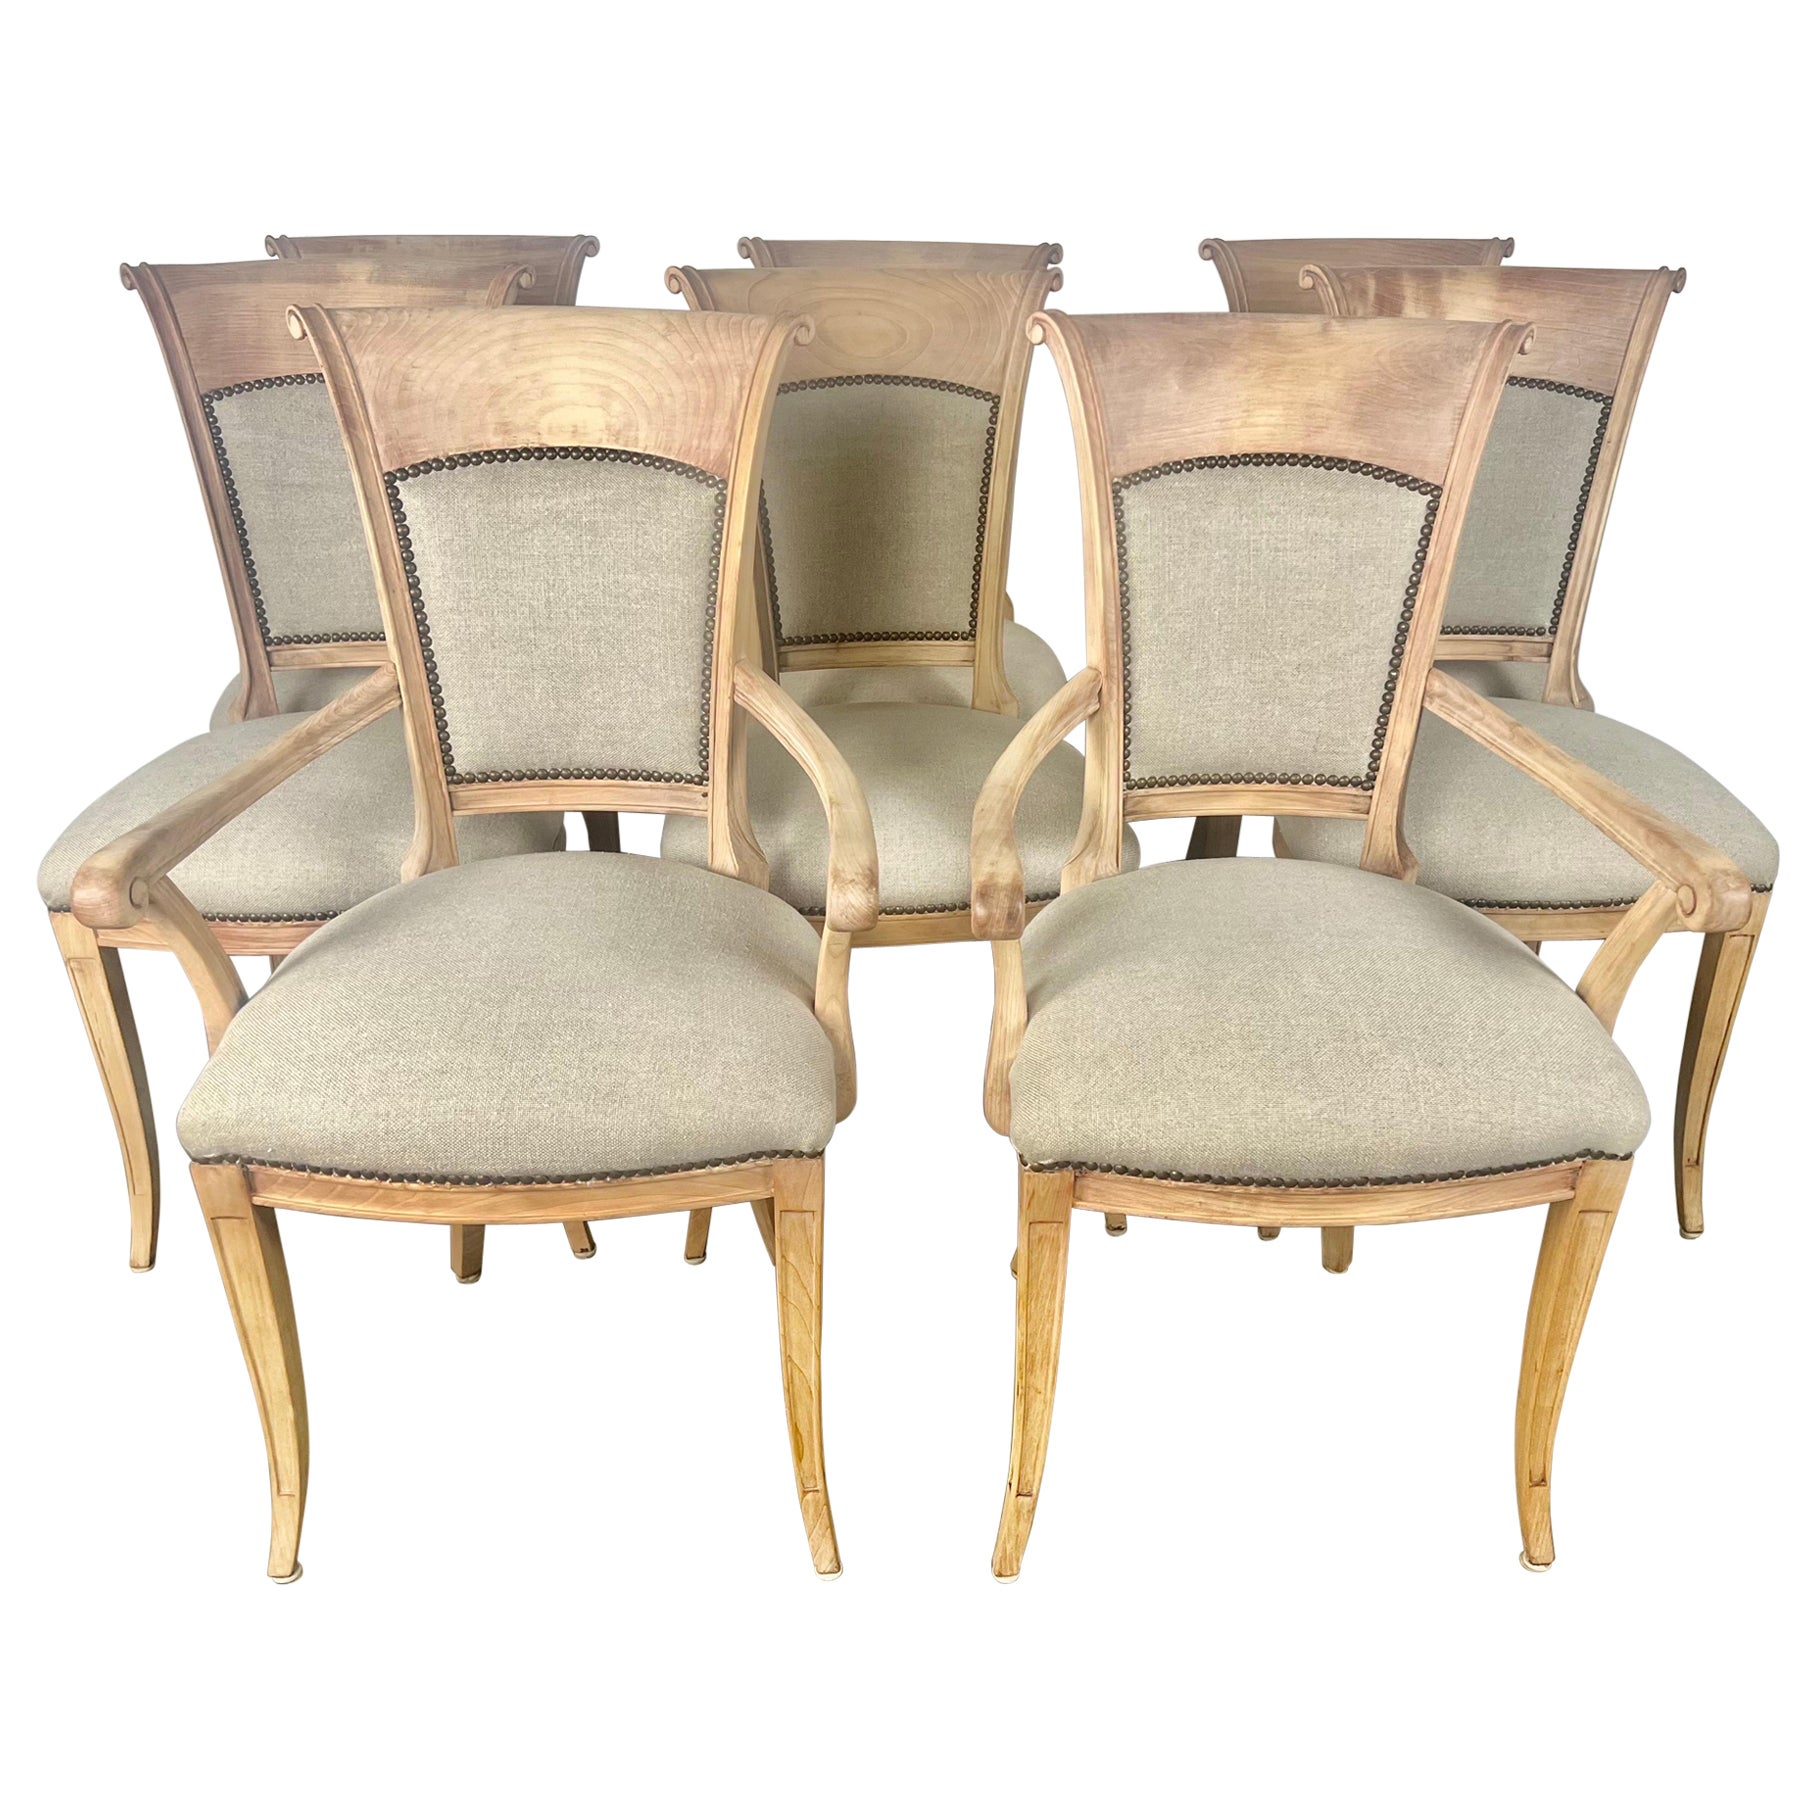 Set of Eight Swedish Dining Room Chairs w/ Belgium Linen Upholstery